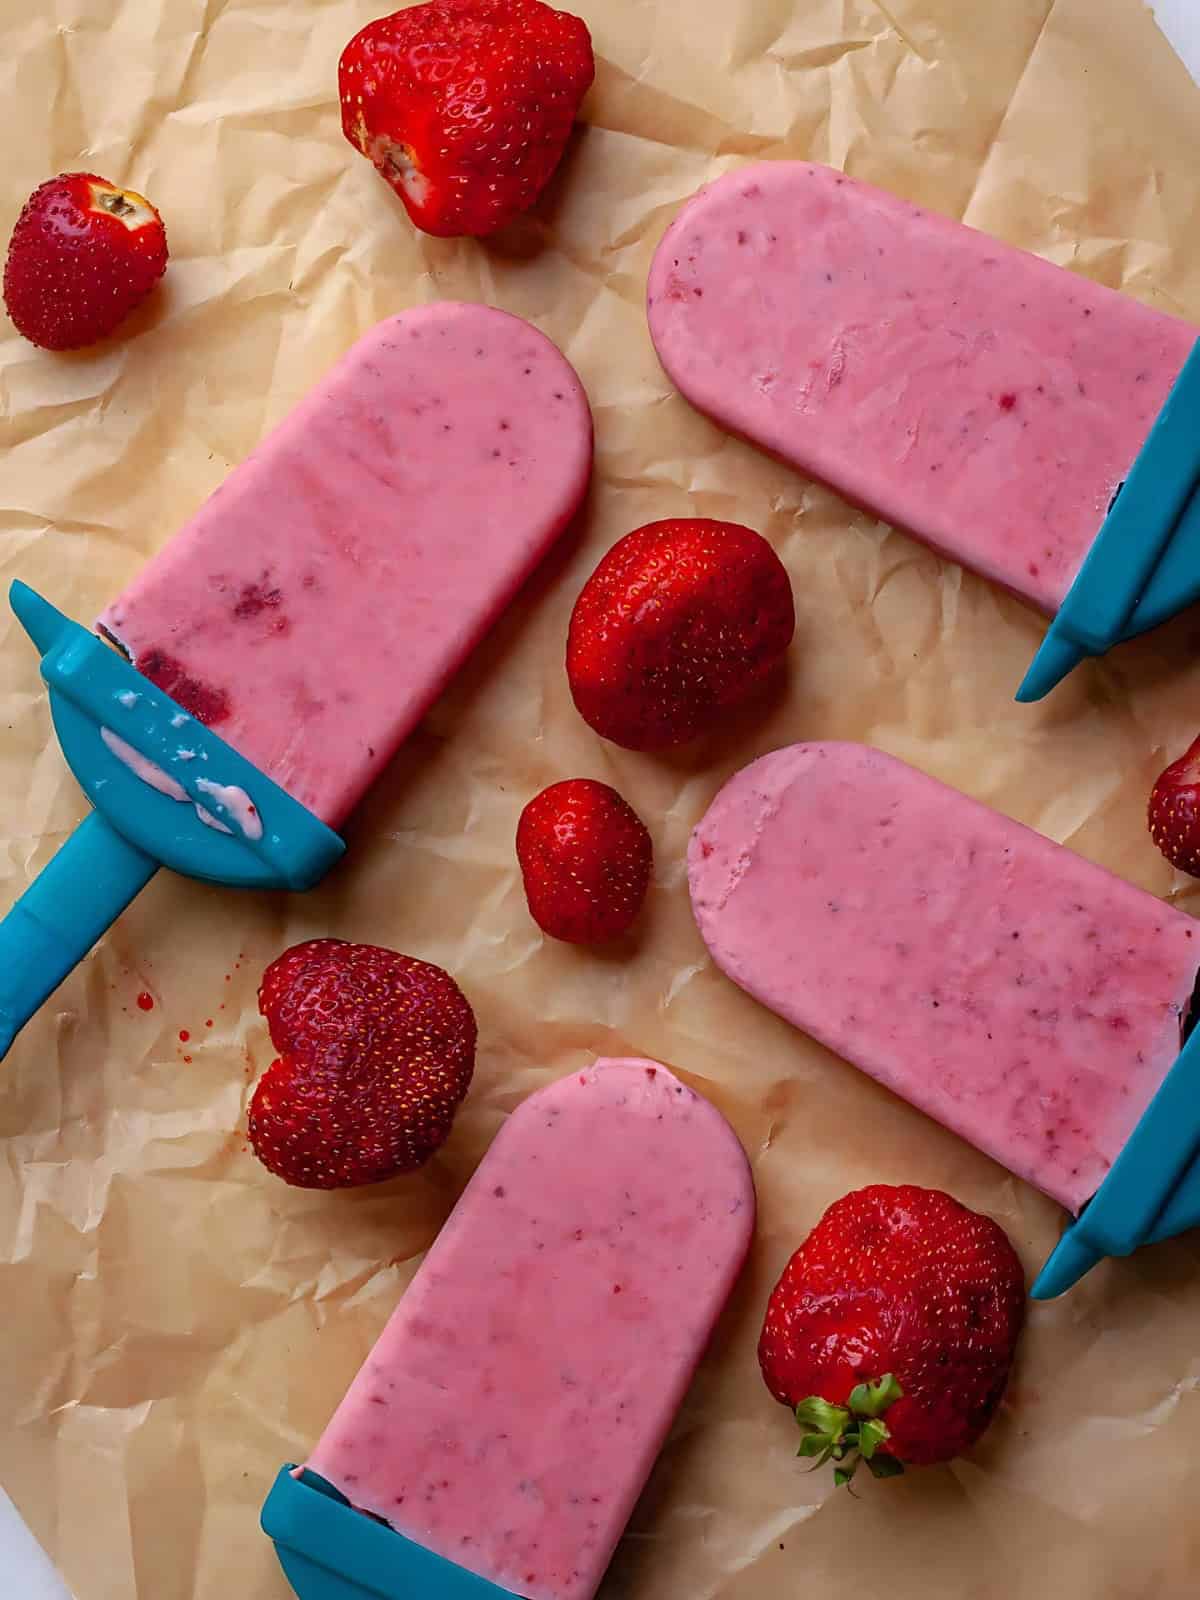 Homemade strawberries and cream Popsicles next to strawberries.